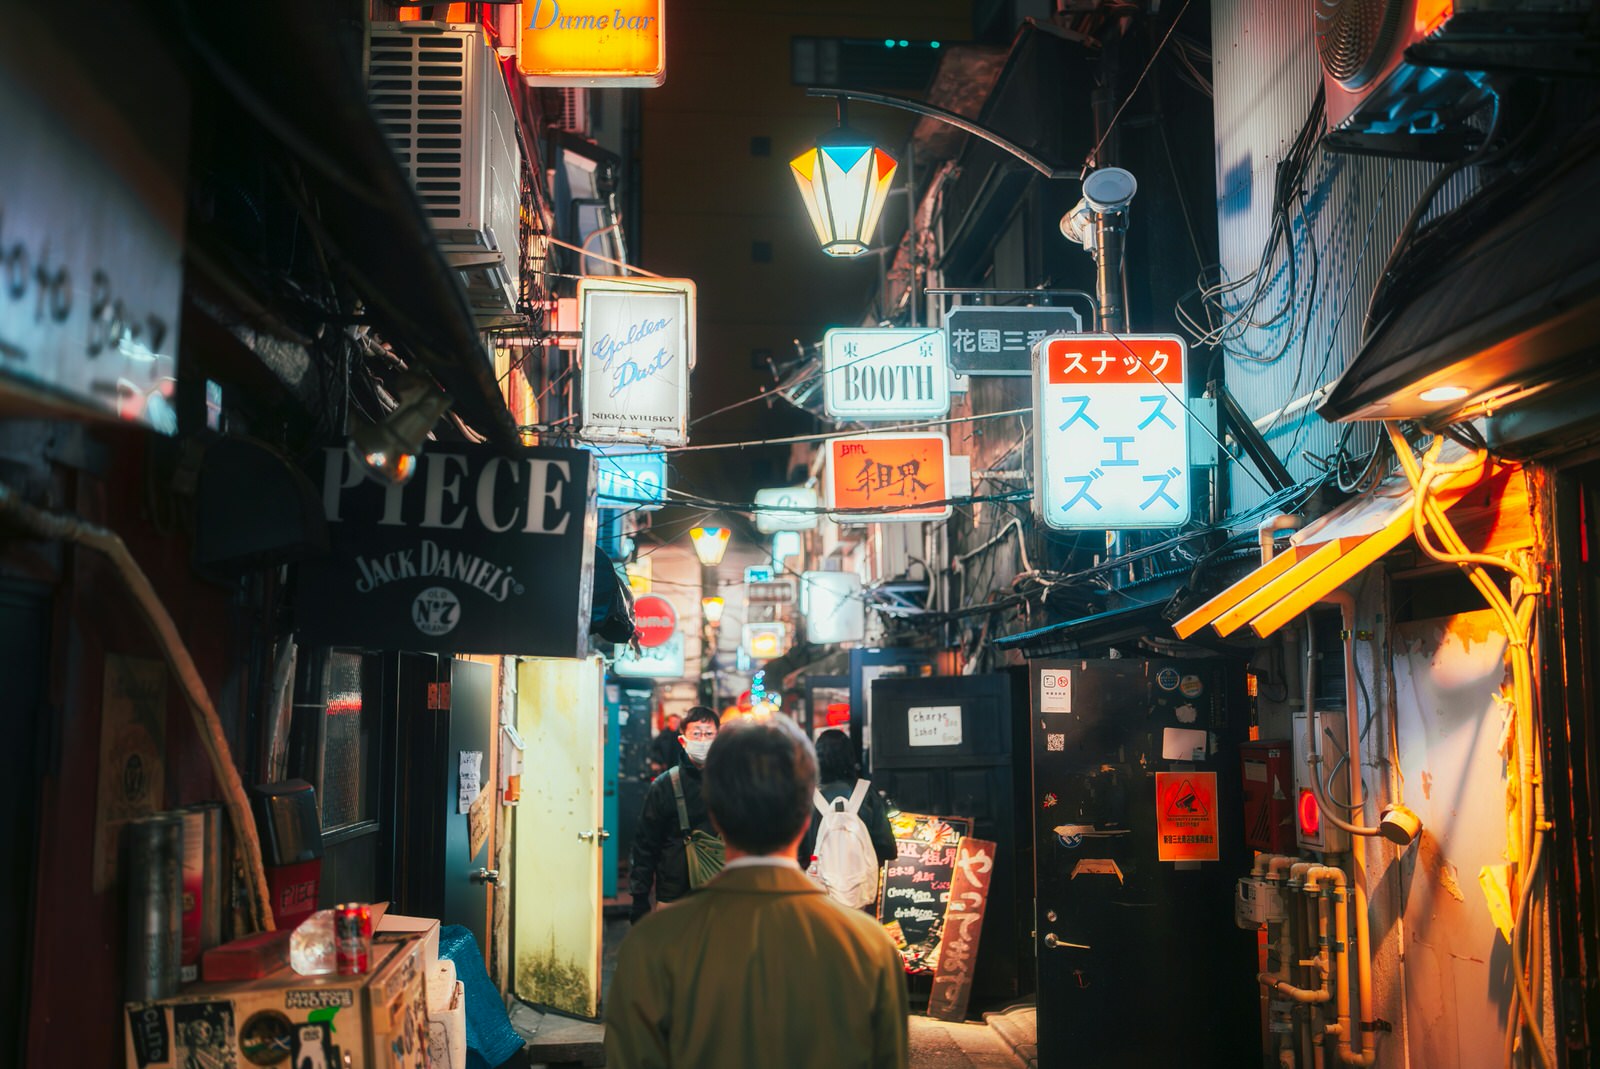 A man looks down an alley in Shinjuku with signs in many different languages.